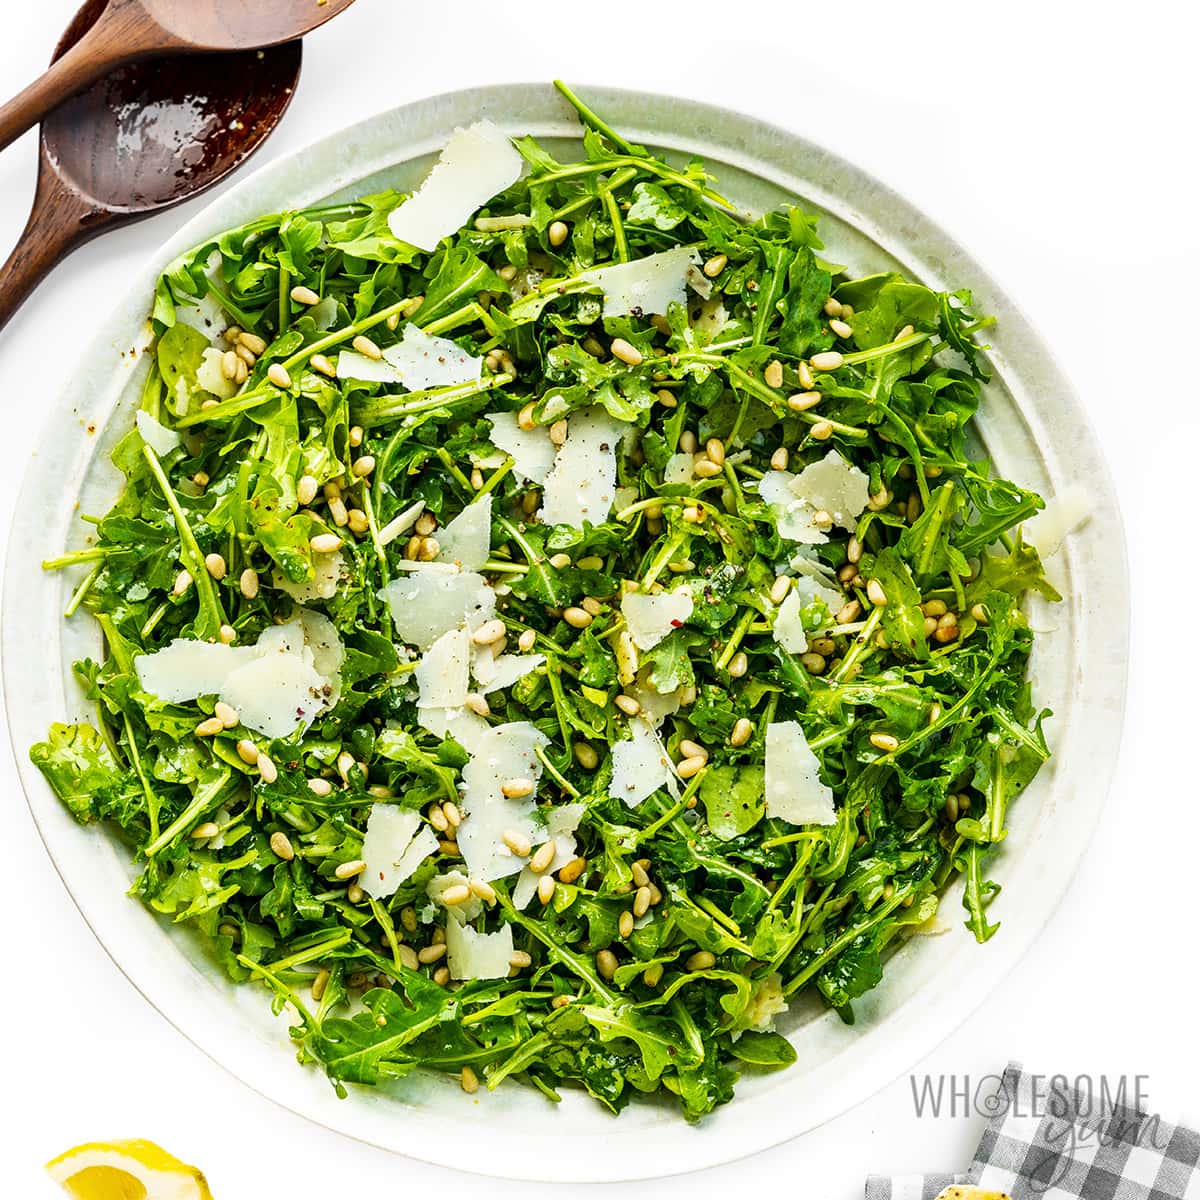 Greens, parmesan, and pine nuts assembled in a bowl.